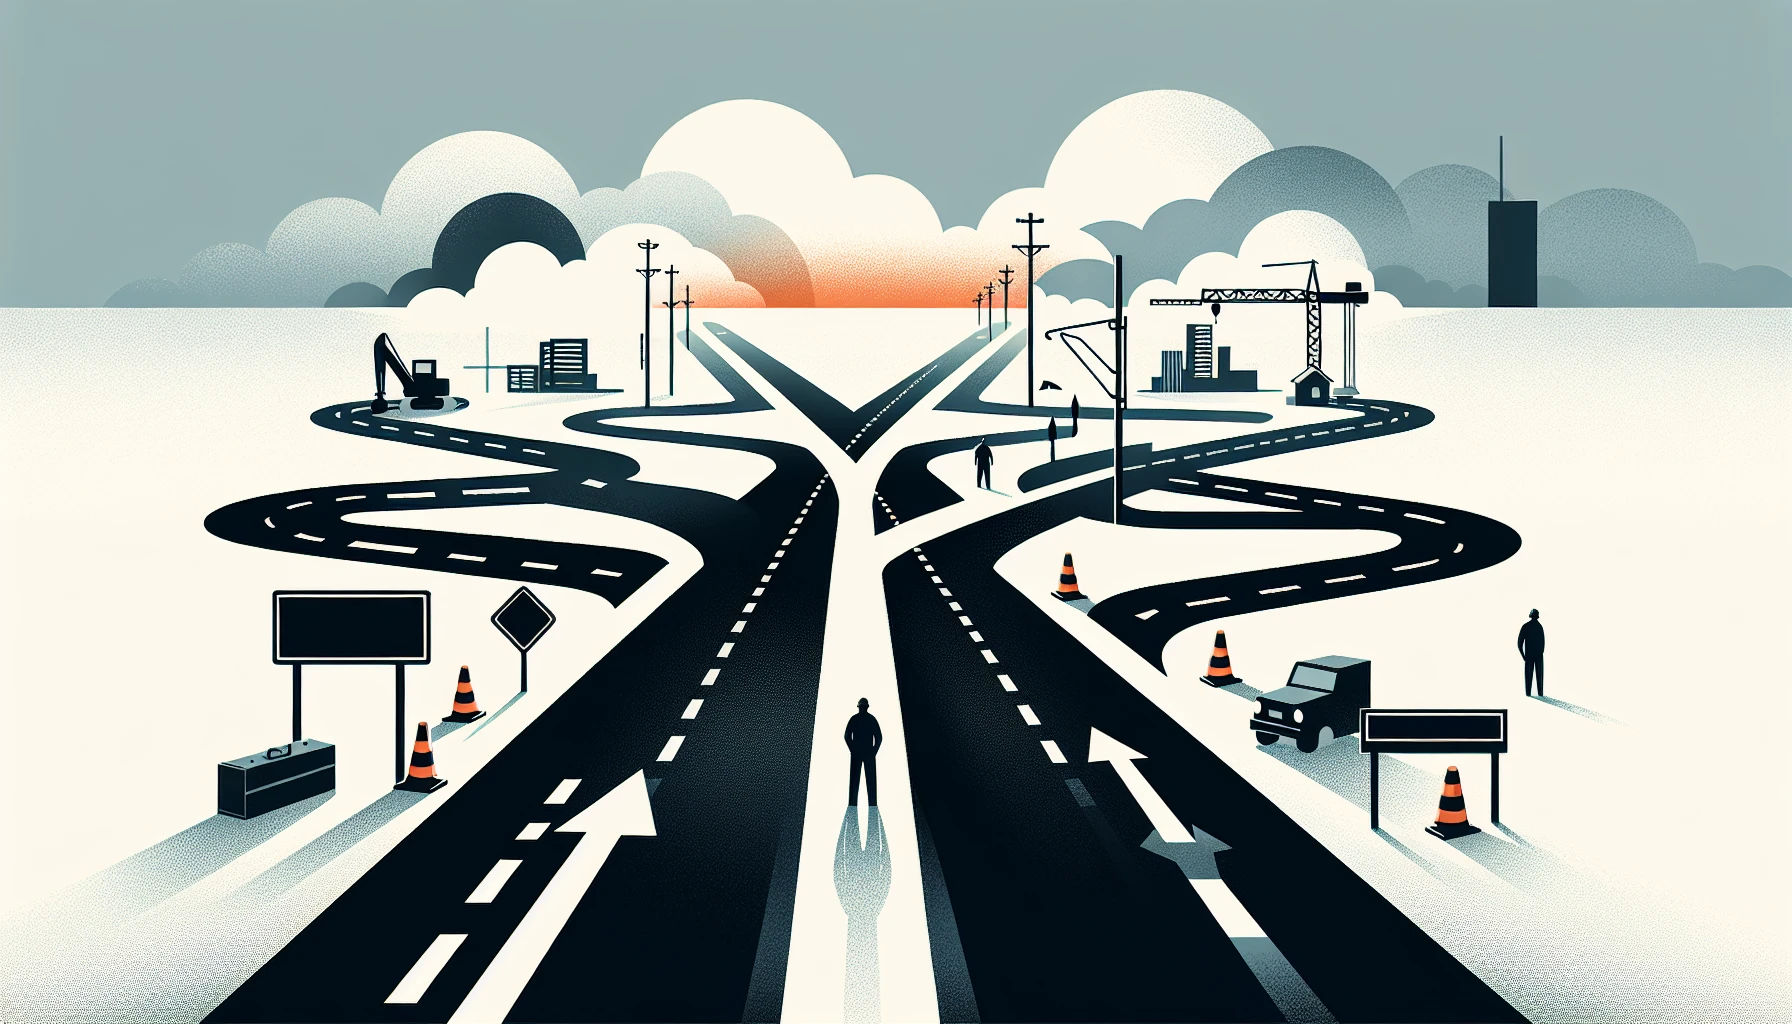 Construction design management illustration with diverging paths and worker silhouettes